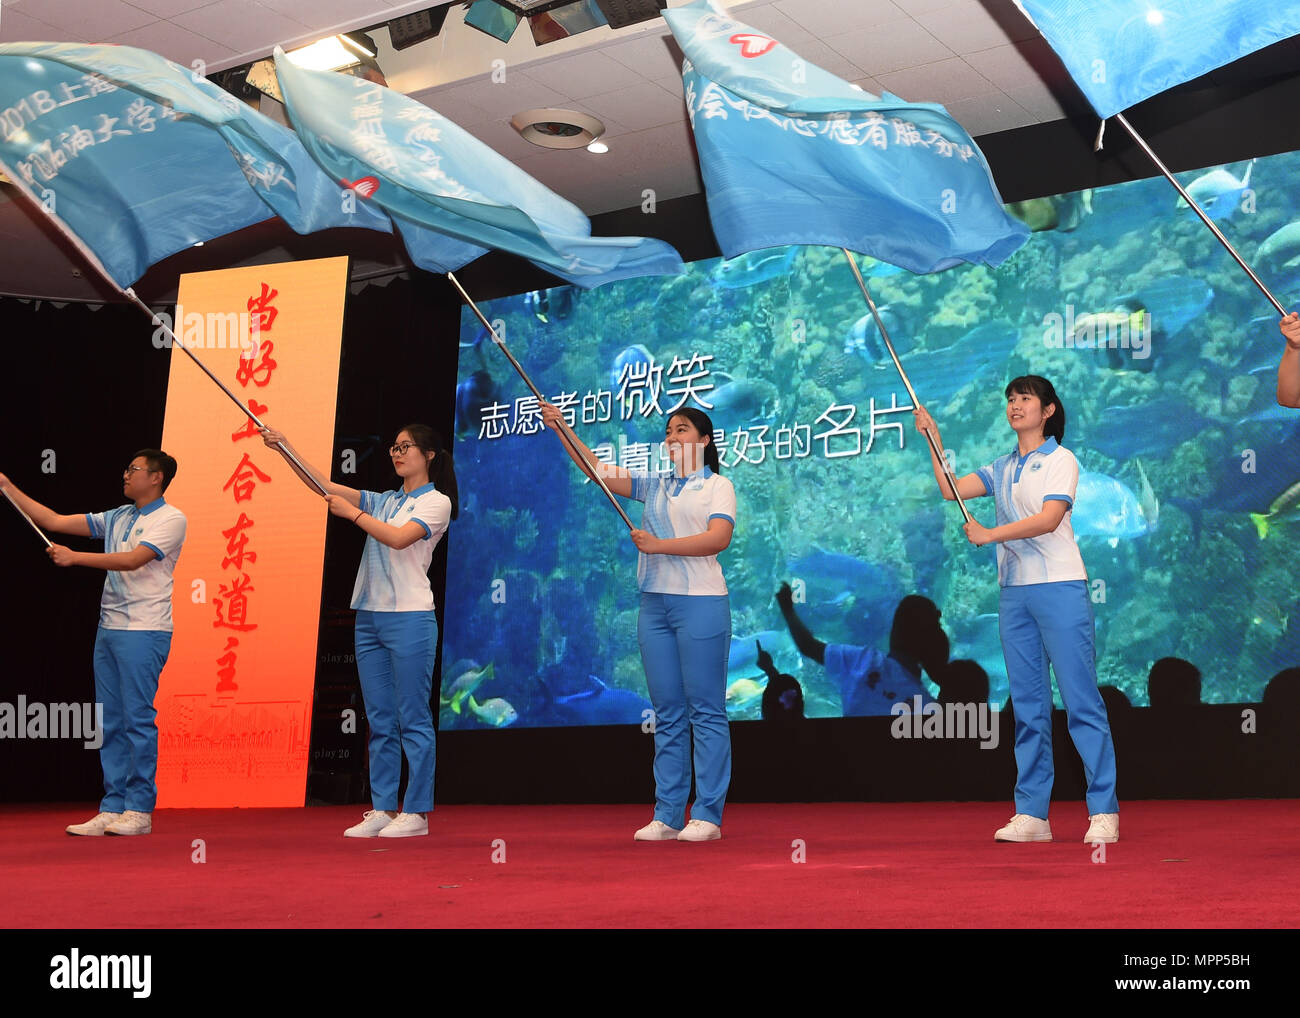 Qingdao, China's Shandong Province. 24th May, 2018. Volunteers attend a launch ceremony for the volunteer program for the upcoming Shanghai Cooperation Organization (SCO) summit in Qingdao, east China's Shandong Province, May 24, 2018. About 2,000 volunteers will offer services such as assisting with guests' arrival and departure, translation, and media requests during the 18th summit of the SCO. Credit: Li Ziheng/Xinhua/Alamy Live News Stock Photo